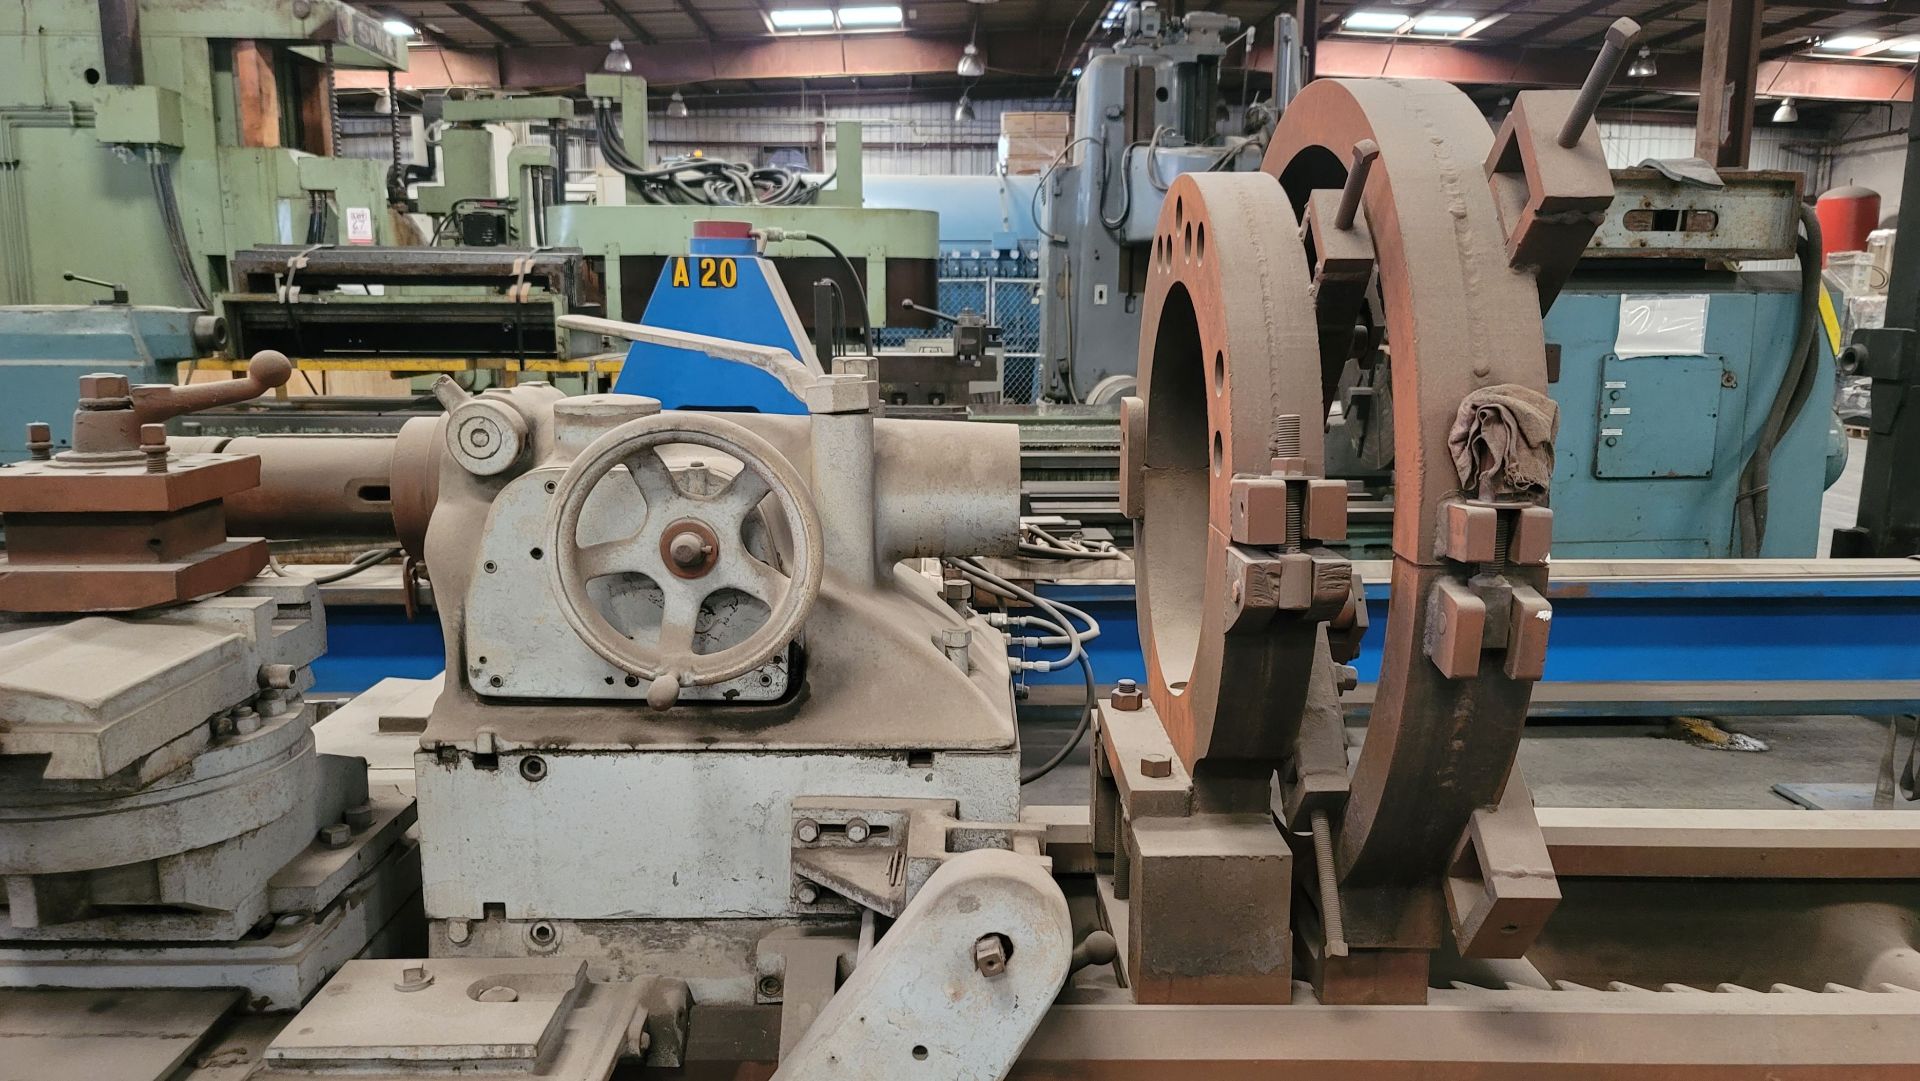 AXELSON A32 ENGINE LATHE, 32" X 168", 30" 4-JAW CHUCK, TAILSTOCK, (2) STEADY RESTS - Image 4 of 9